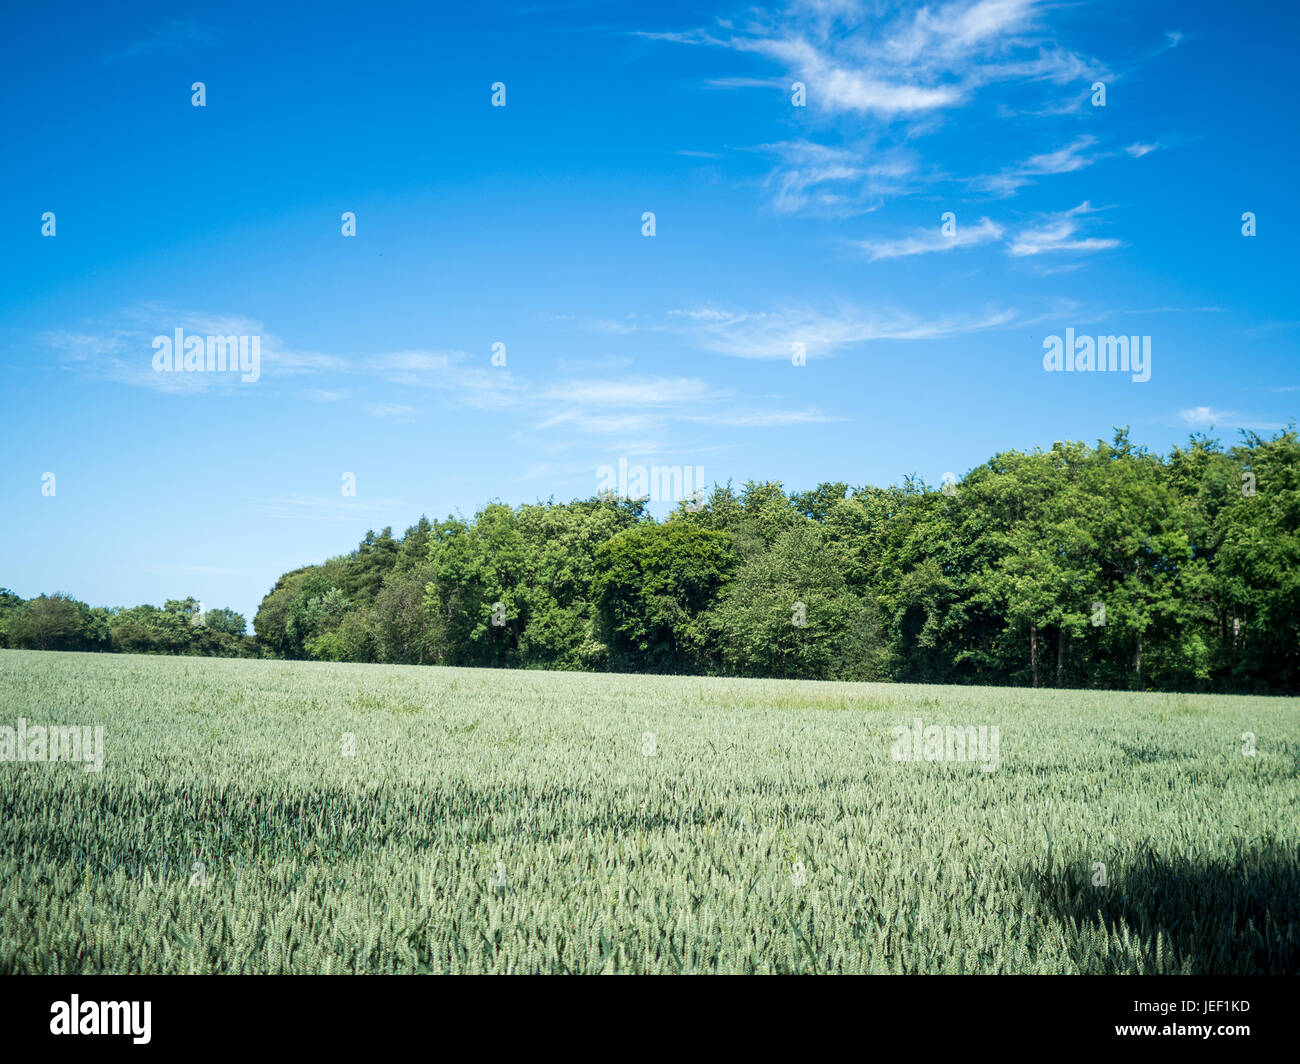 Unripe wheat blowing in a light breeze in farmland in Hertfordshire, England, beneath clear blue skies on a sunny day. Stock Photo